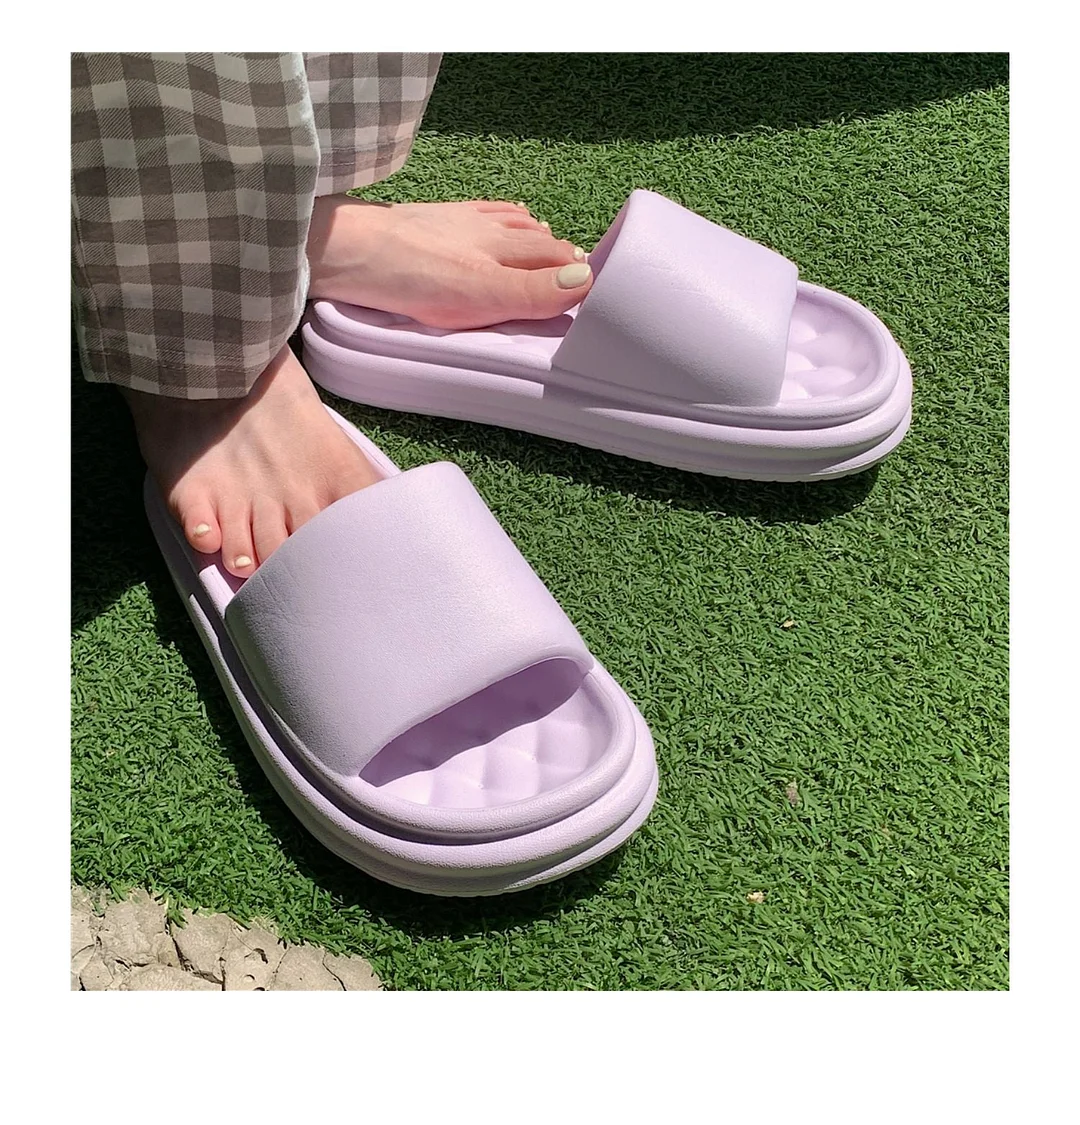 2021 Summer Sneakers for Home Comzy Soft EVA Household Slippers for Women Thicken Platform Antislip Flats Outdoor Woman Shoes